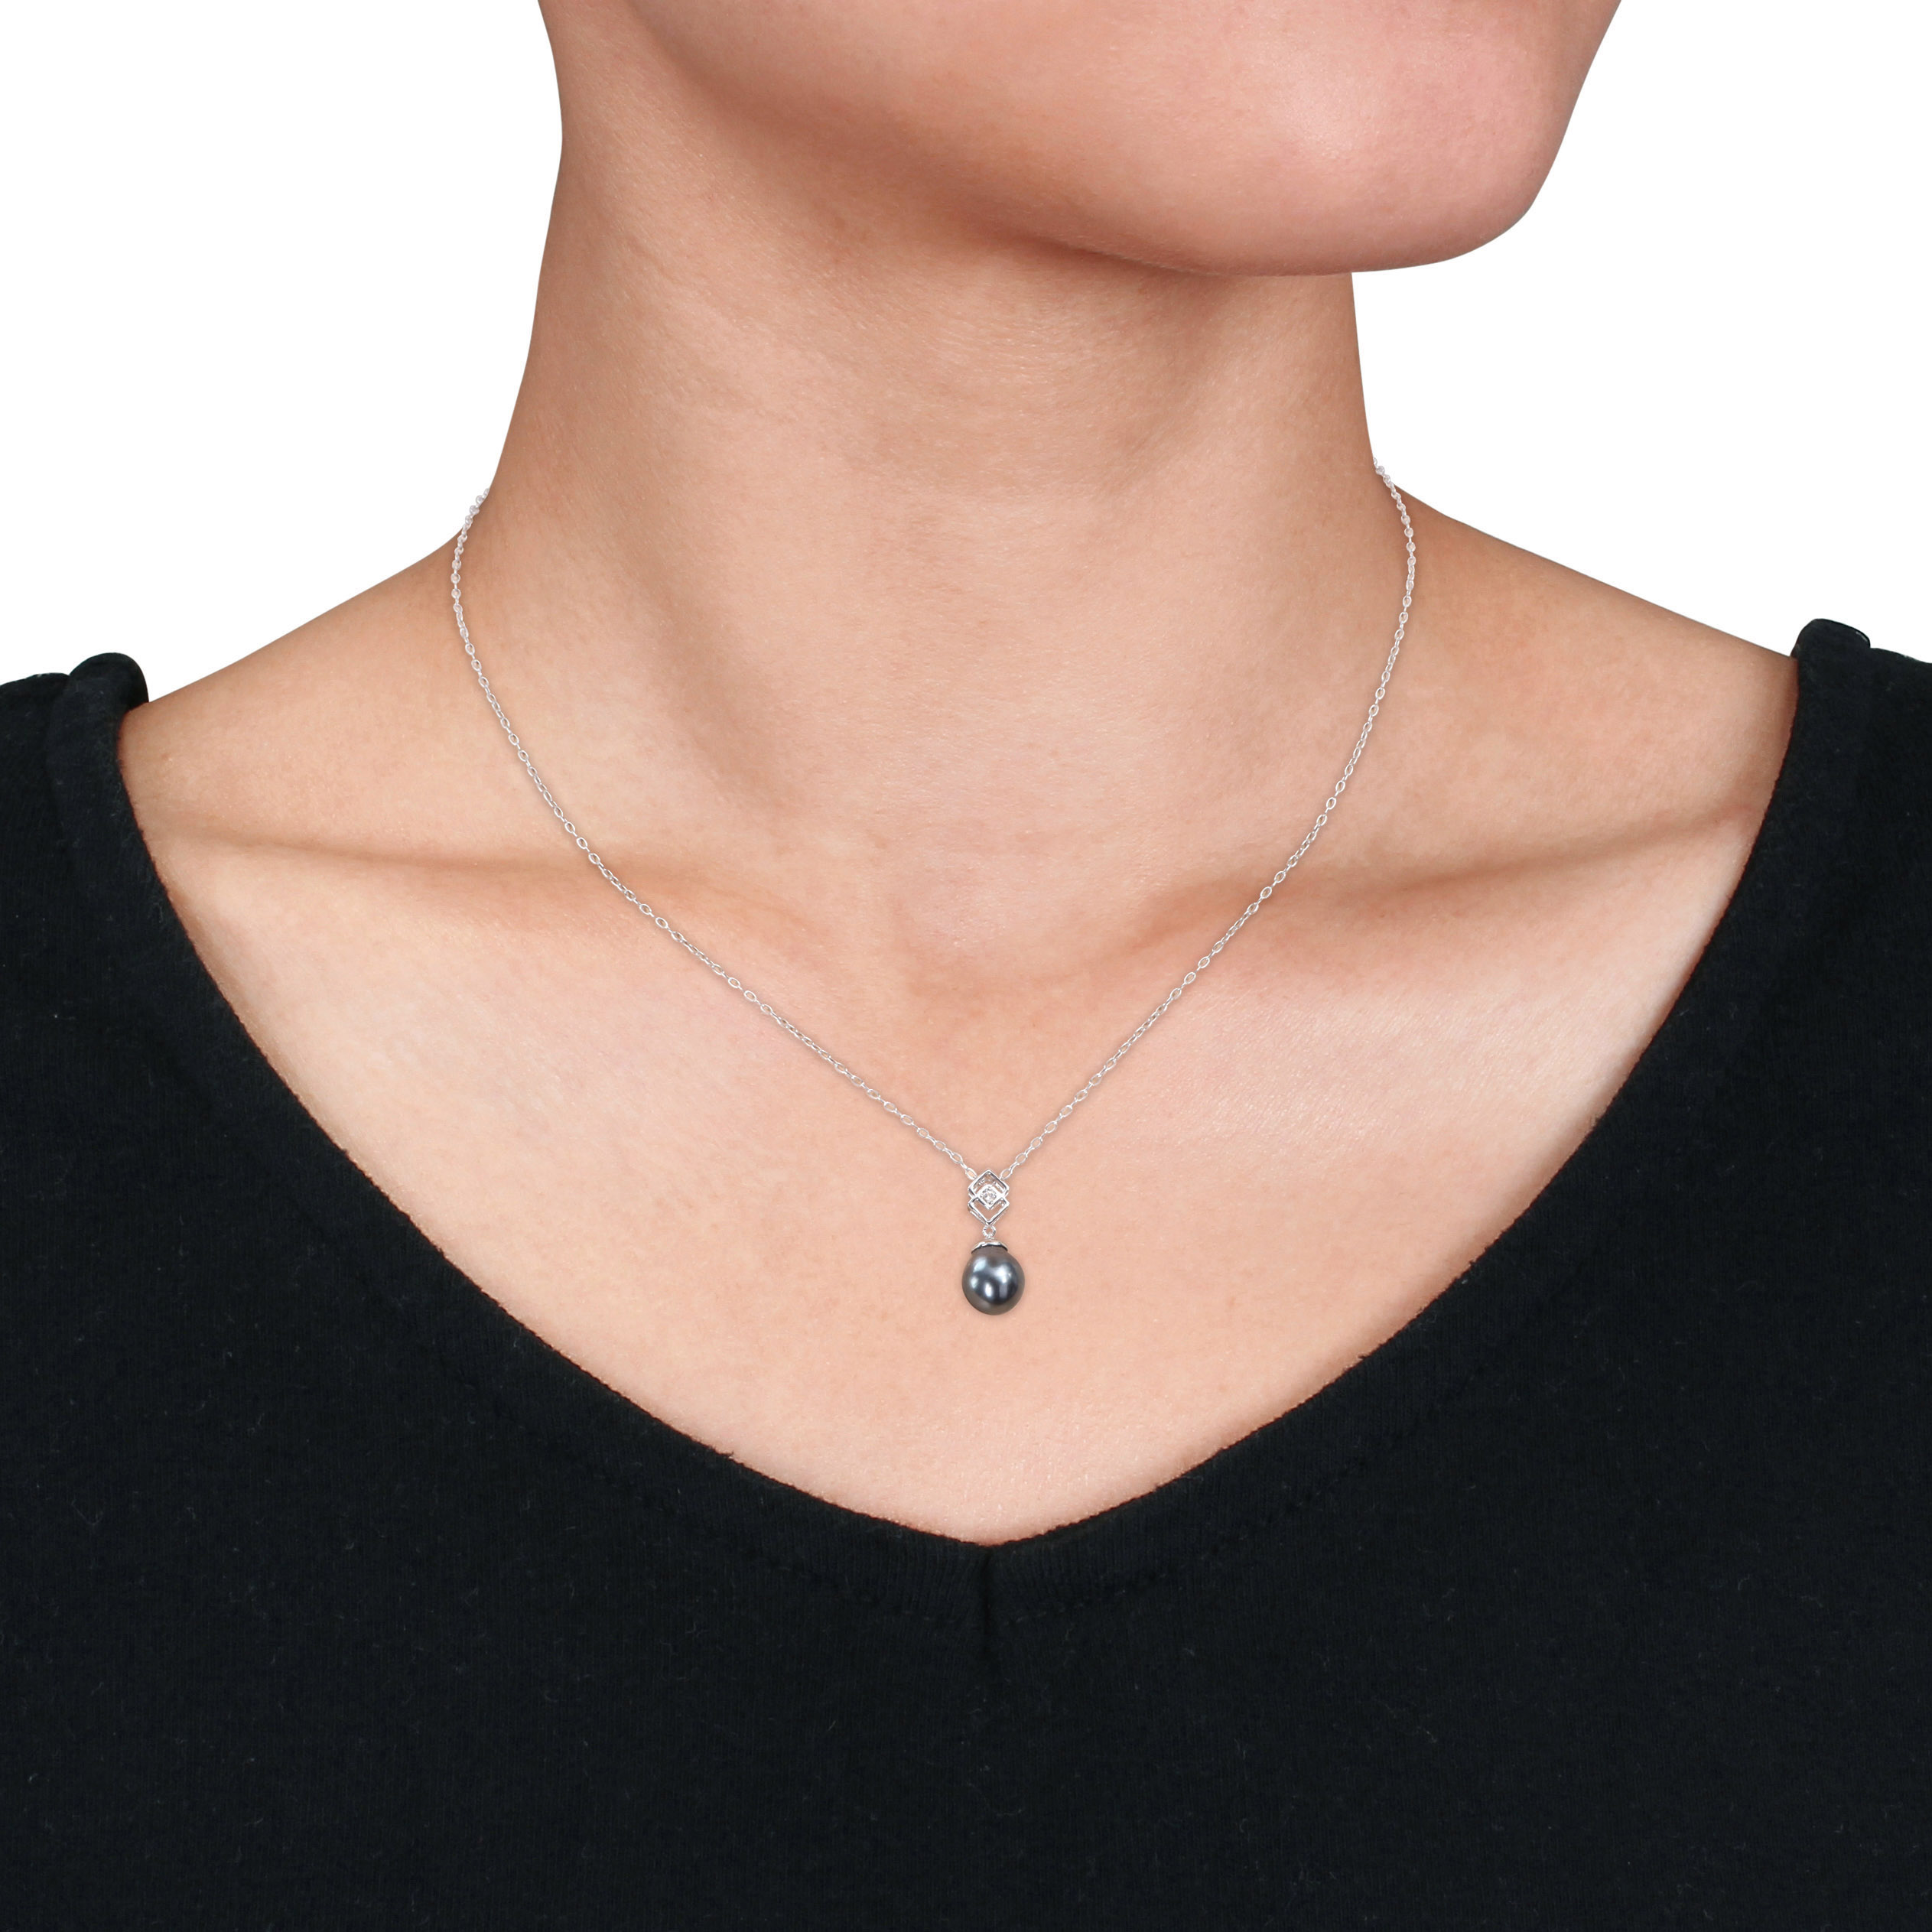 8-9 MM Black Tahitian Cultured Pearl and White Topaz Lozenge Drop Pendant with Chain in Sterling Silver